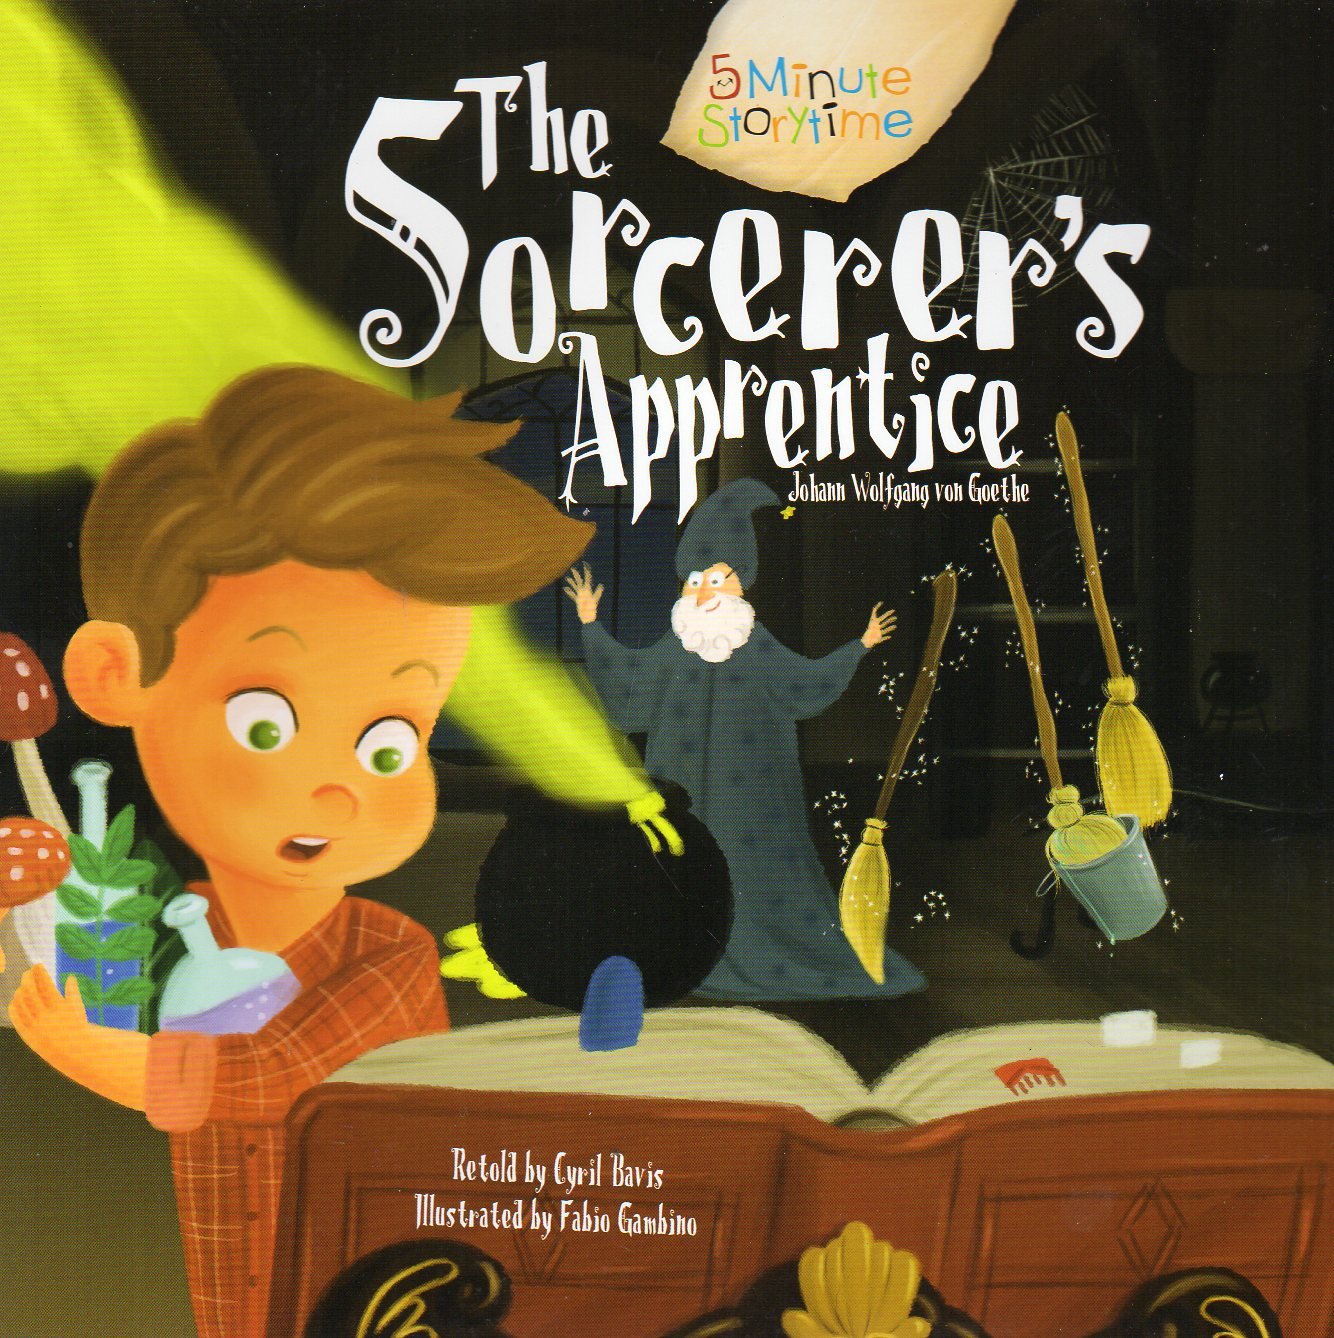 The Sorcerer's Apprentice - 5 Minute Story time - Classic Fairy Tales